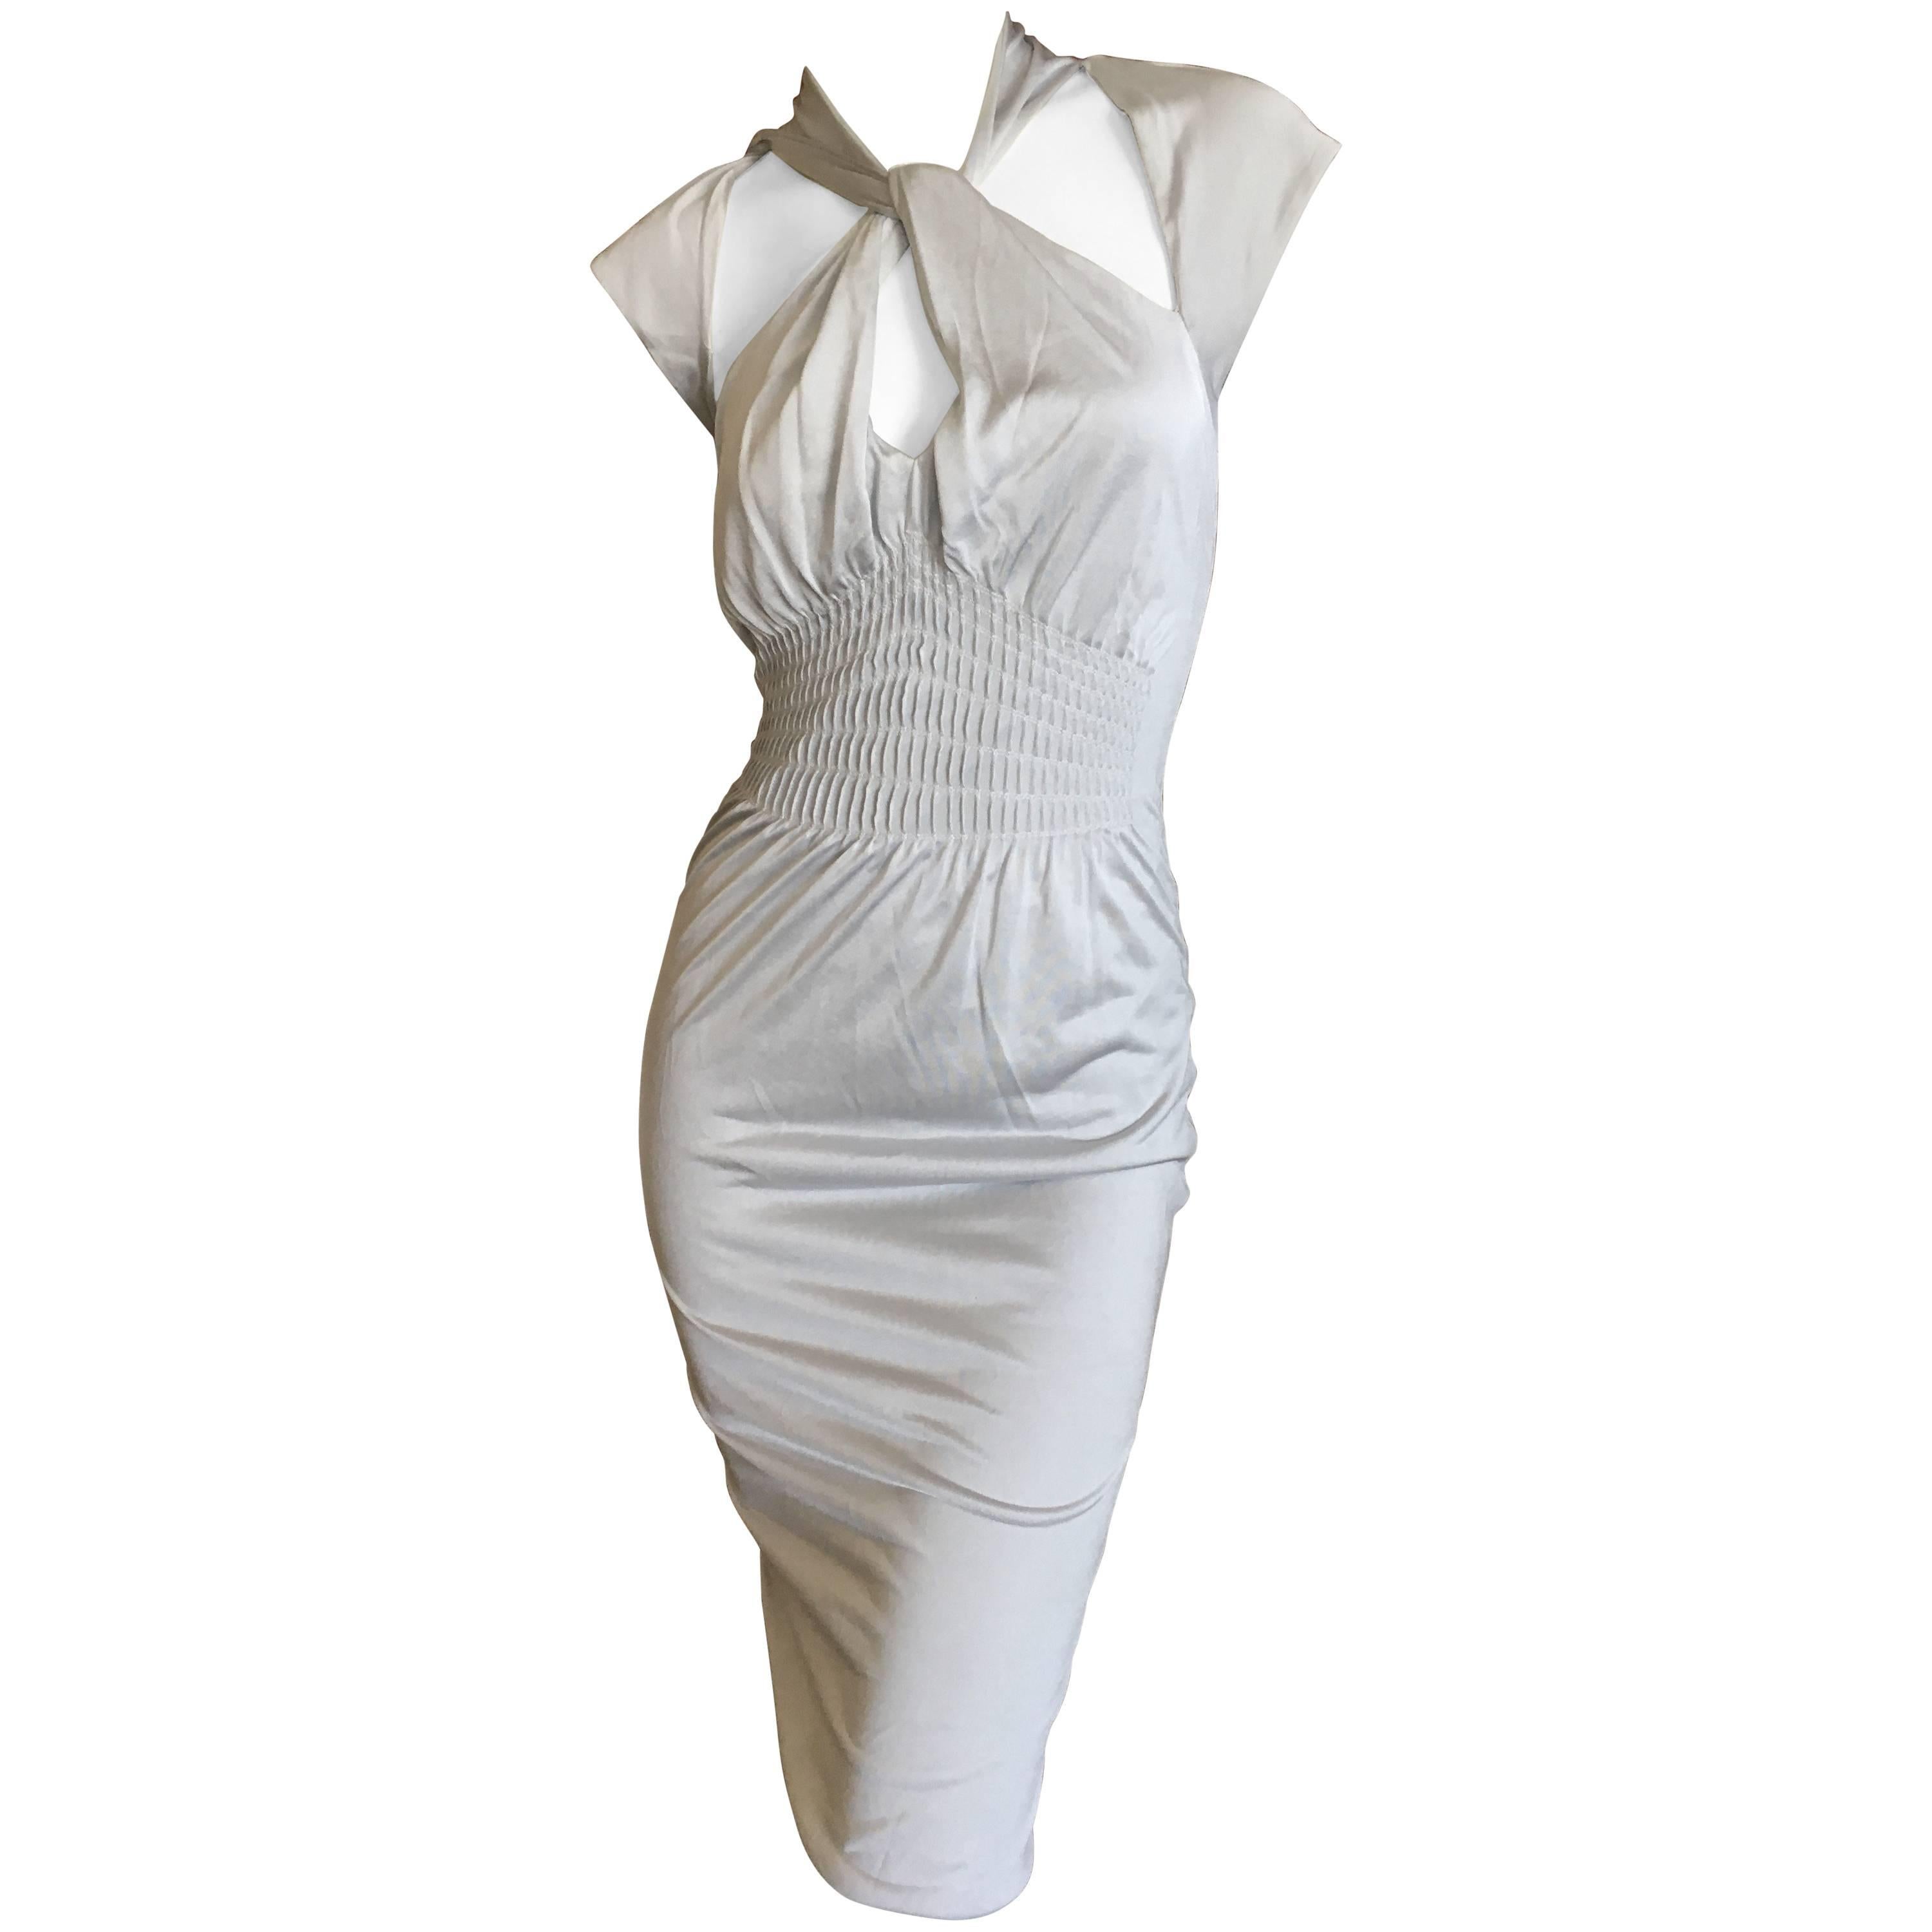 Gucci by Tom Ford Silver Backless Keyhole Dress.
So sexy, size XS
Bust 36